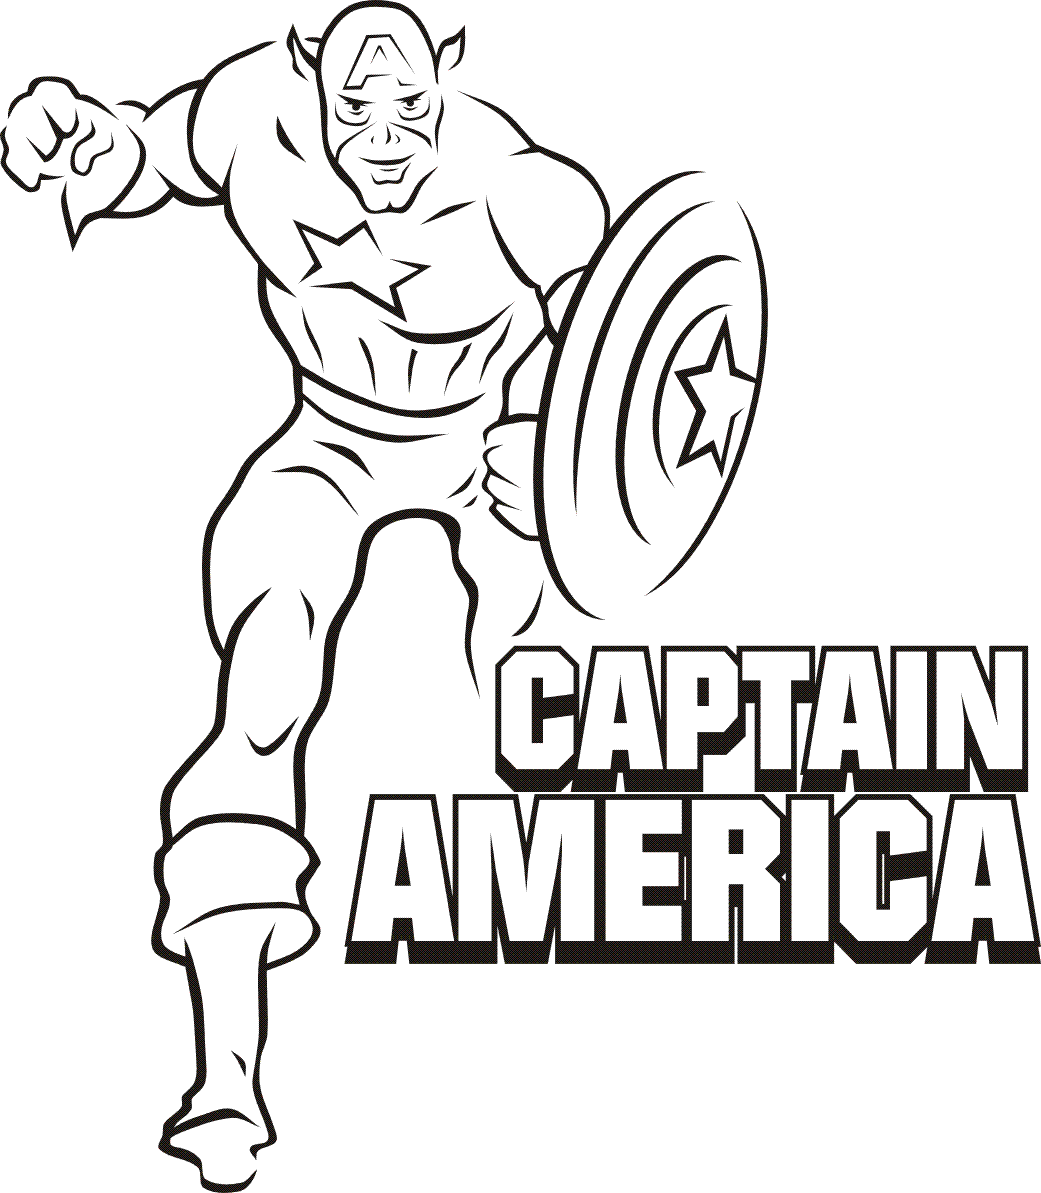 Superhero coloring pages to download and print for free